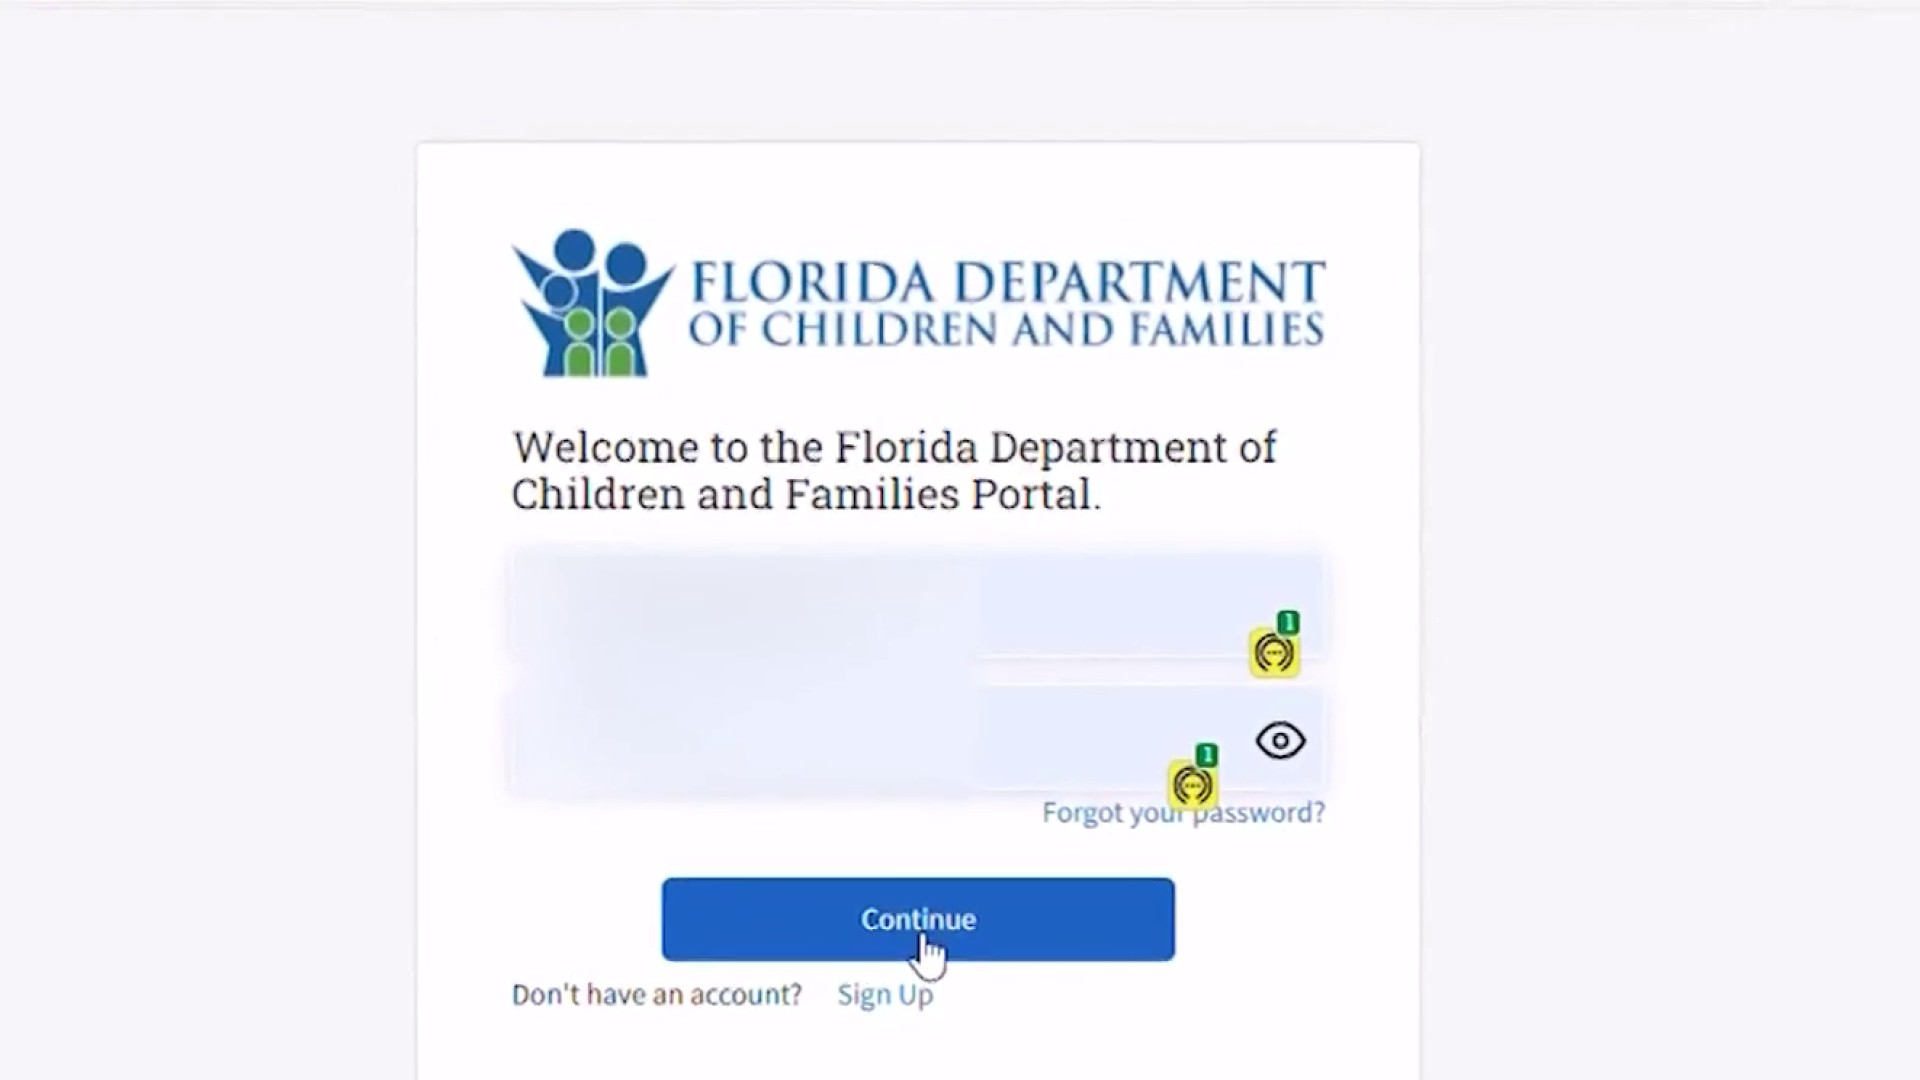 Access Florida - Florida Department of Children and Families